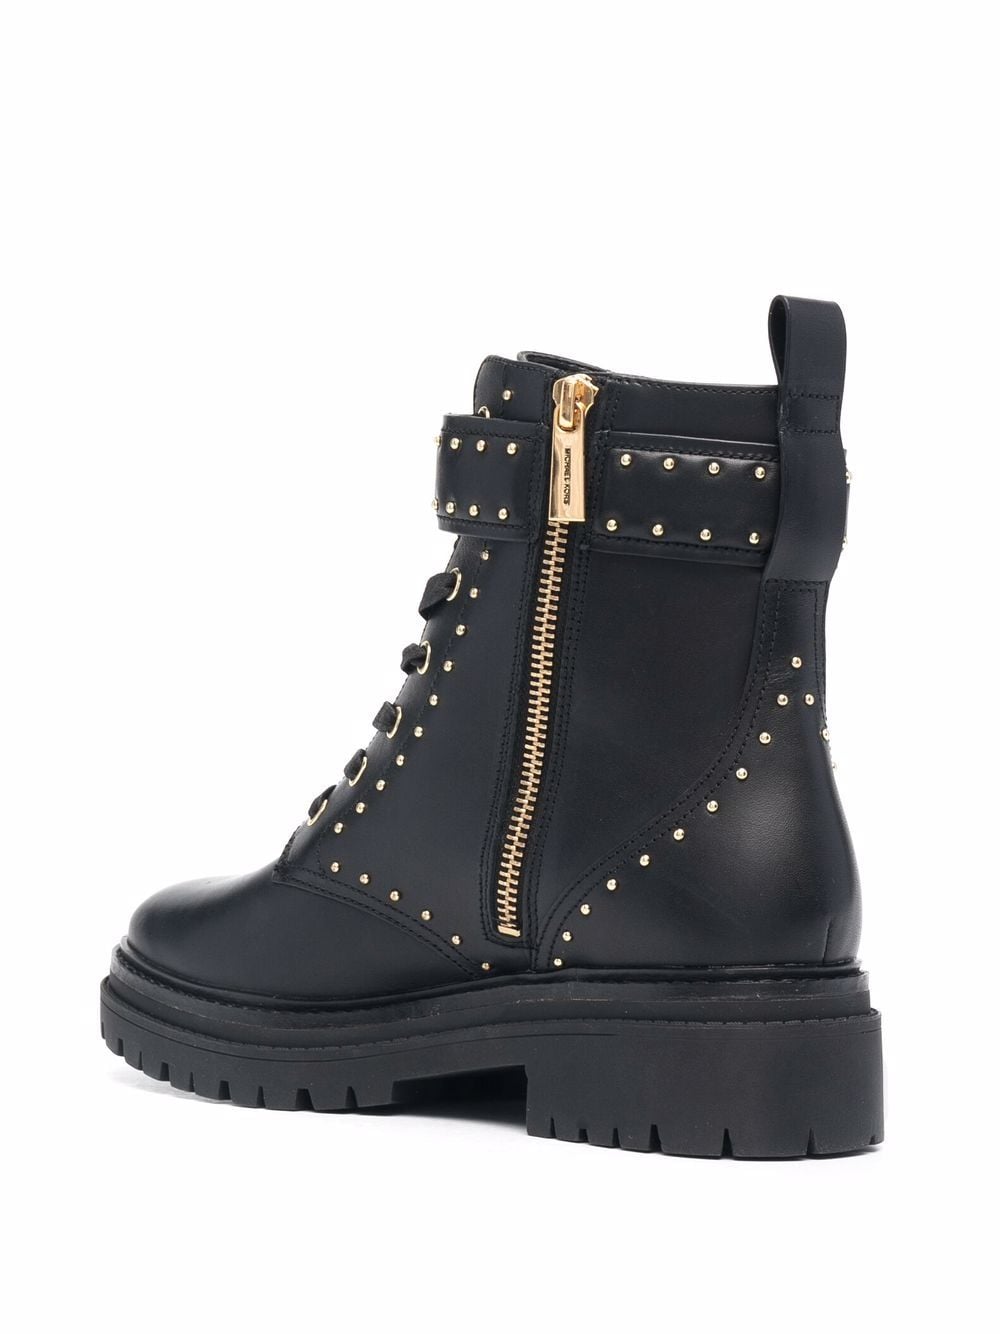 Michael Michael Kors Studded Ankle Boots - Farfetch